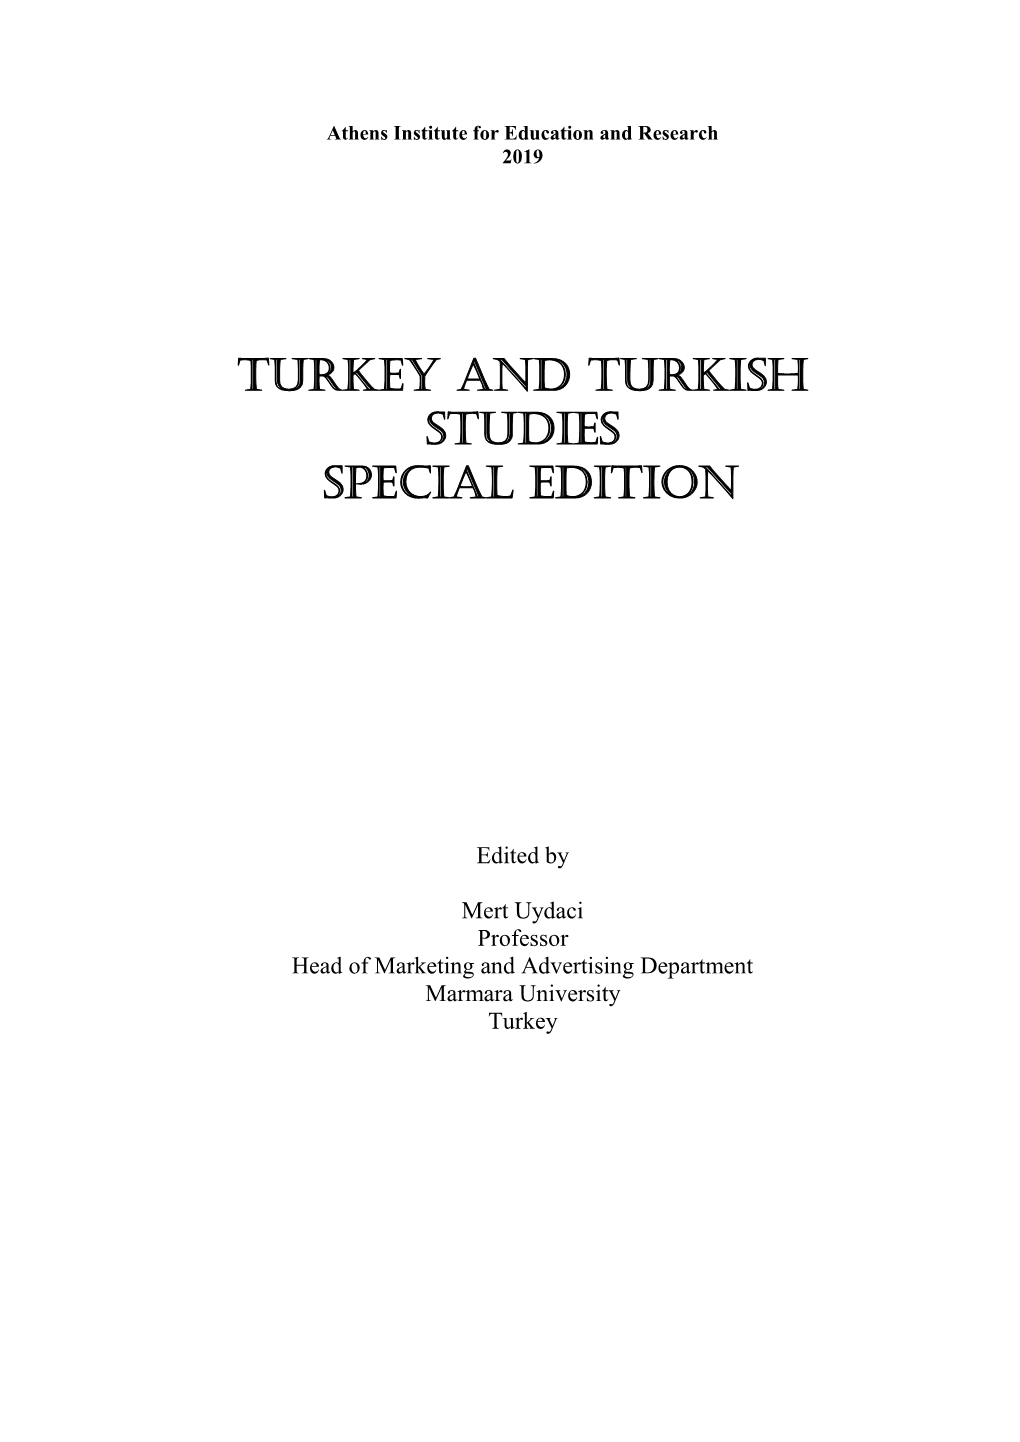 Turkey and Turkish Studies Special Edition